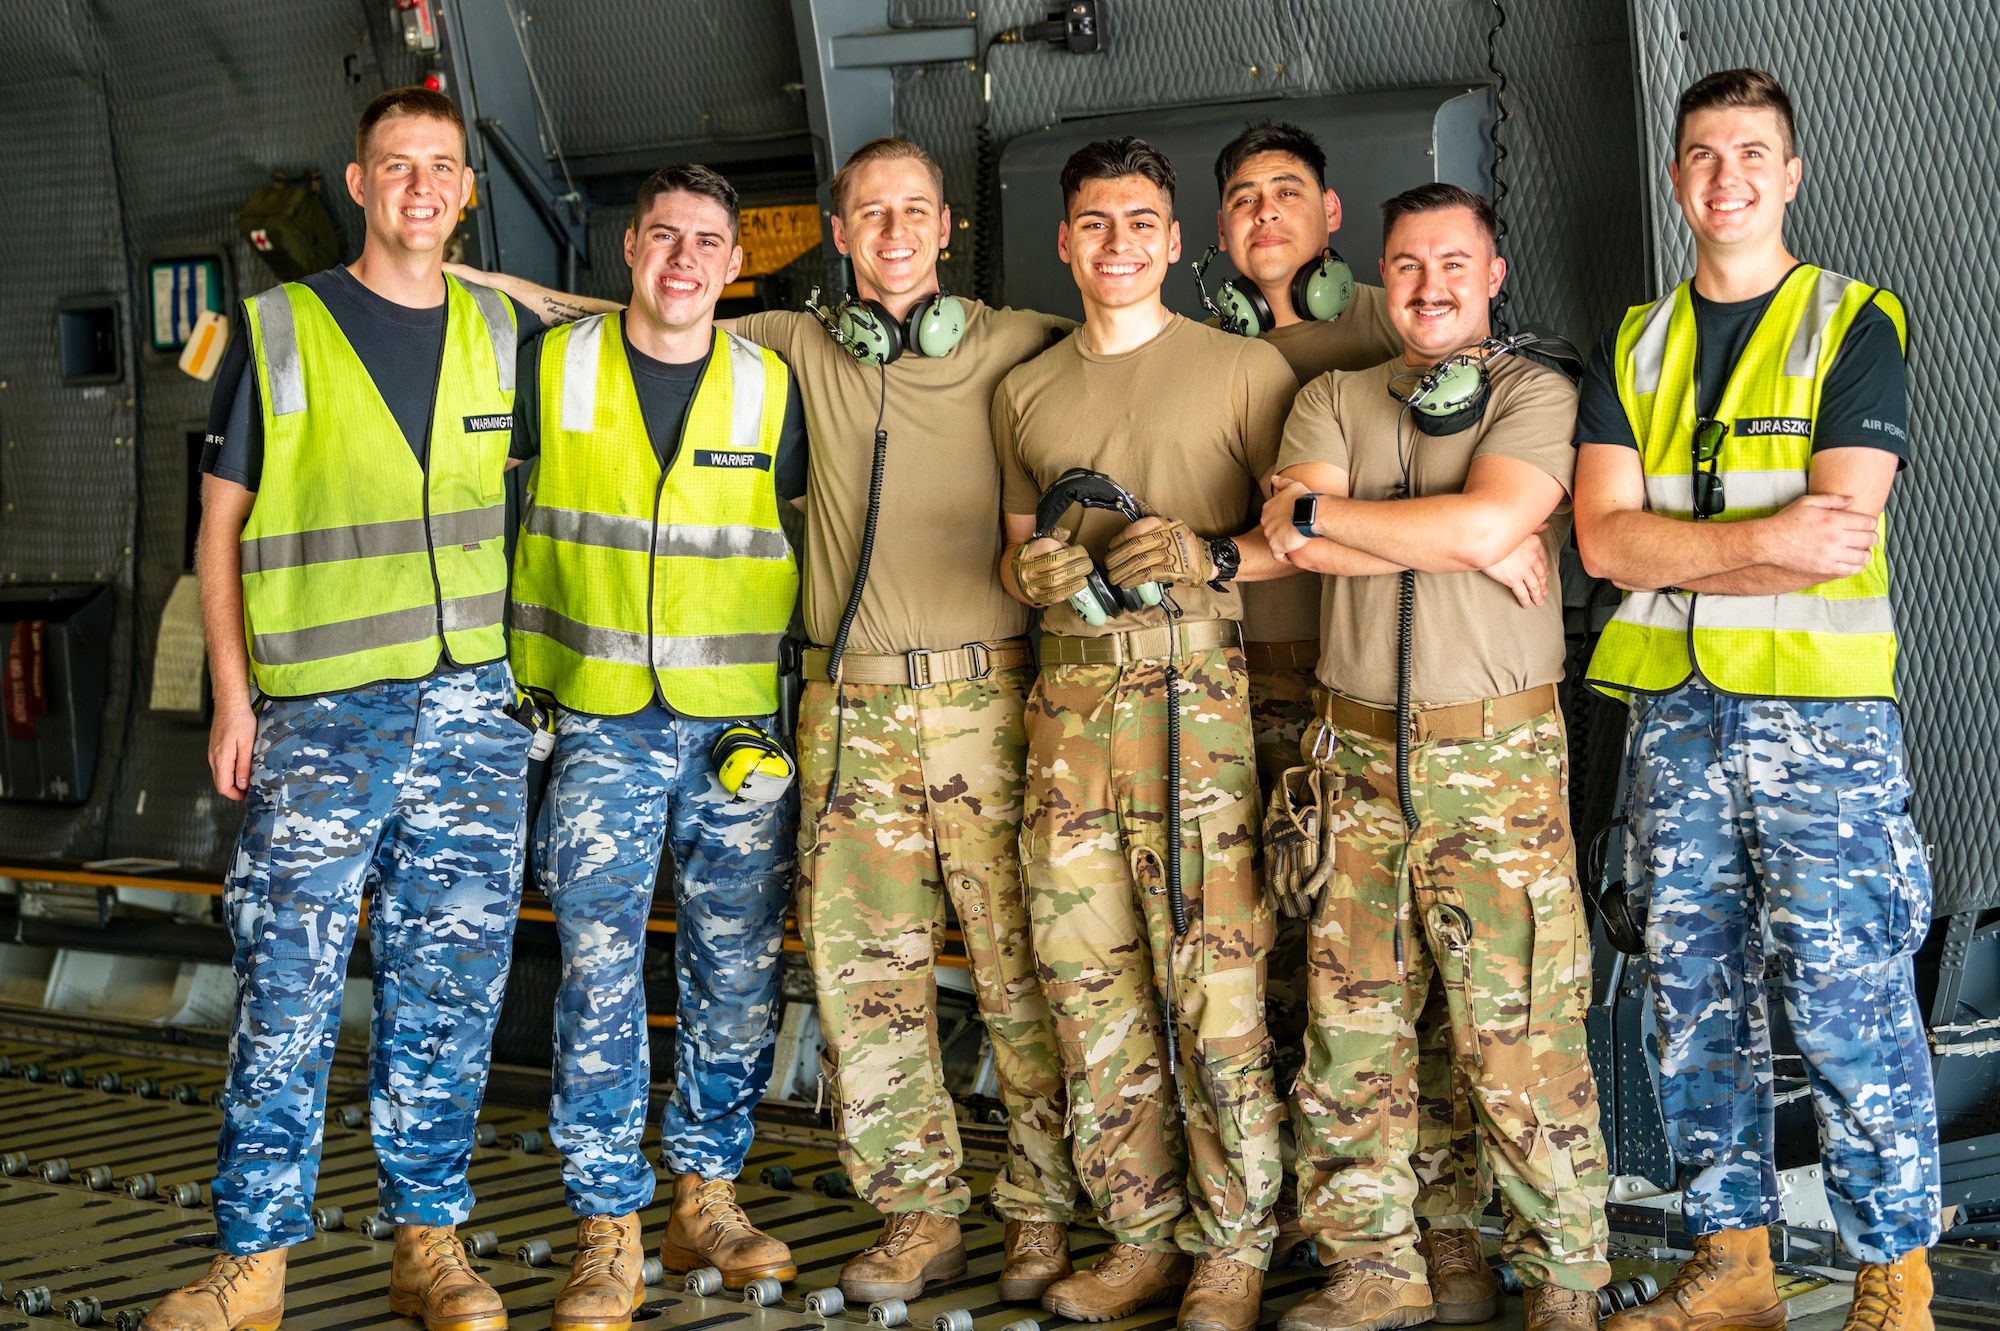 U.S. Air Force Airmen train and celebrate 80 years of heritage with members of the Royal Australian Air Force.